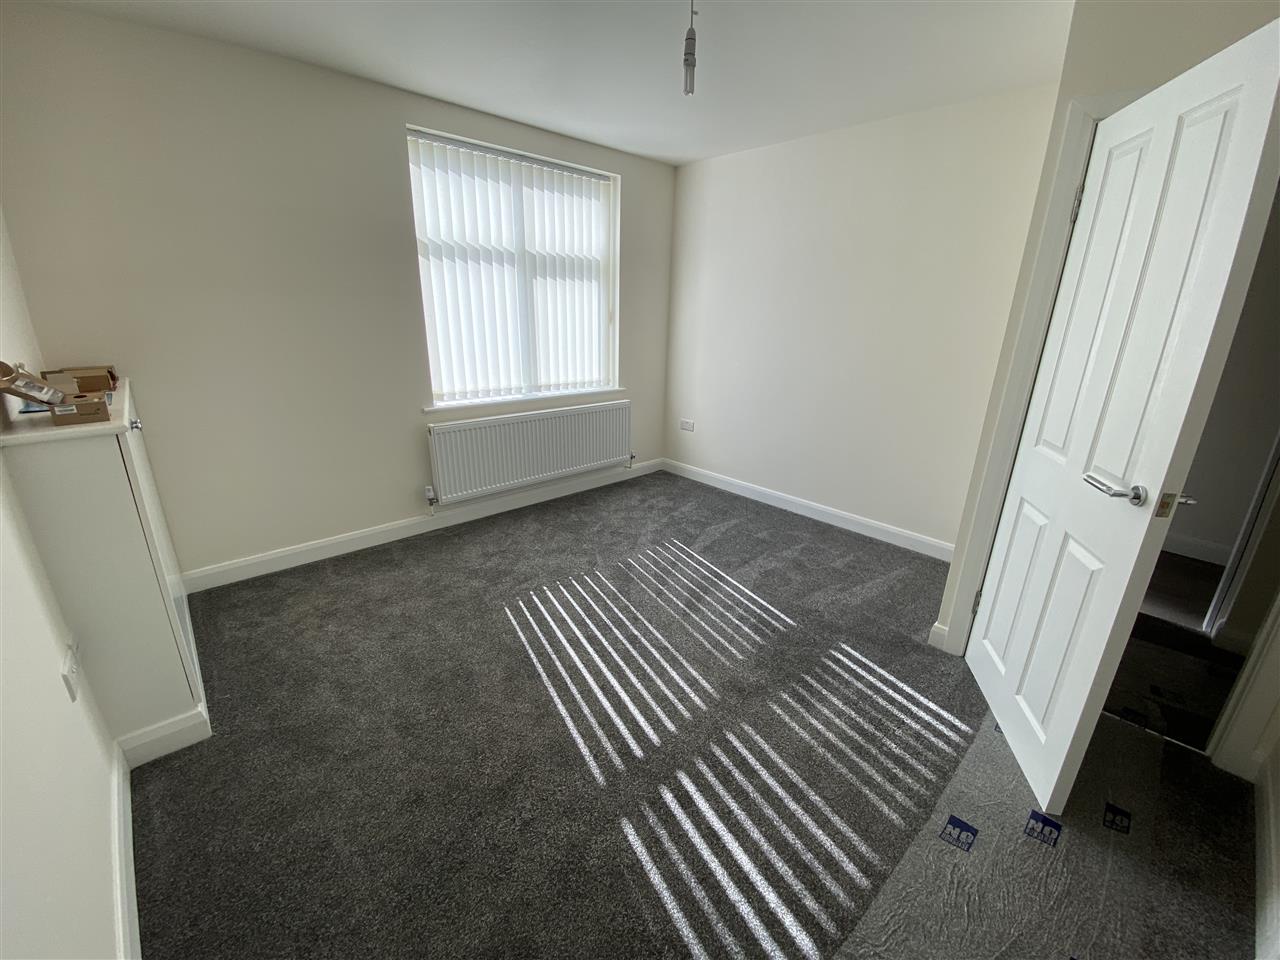 2 bed  to rent in Spendmore, Coppull, Chorley 2